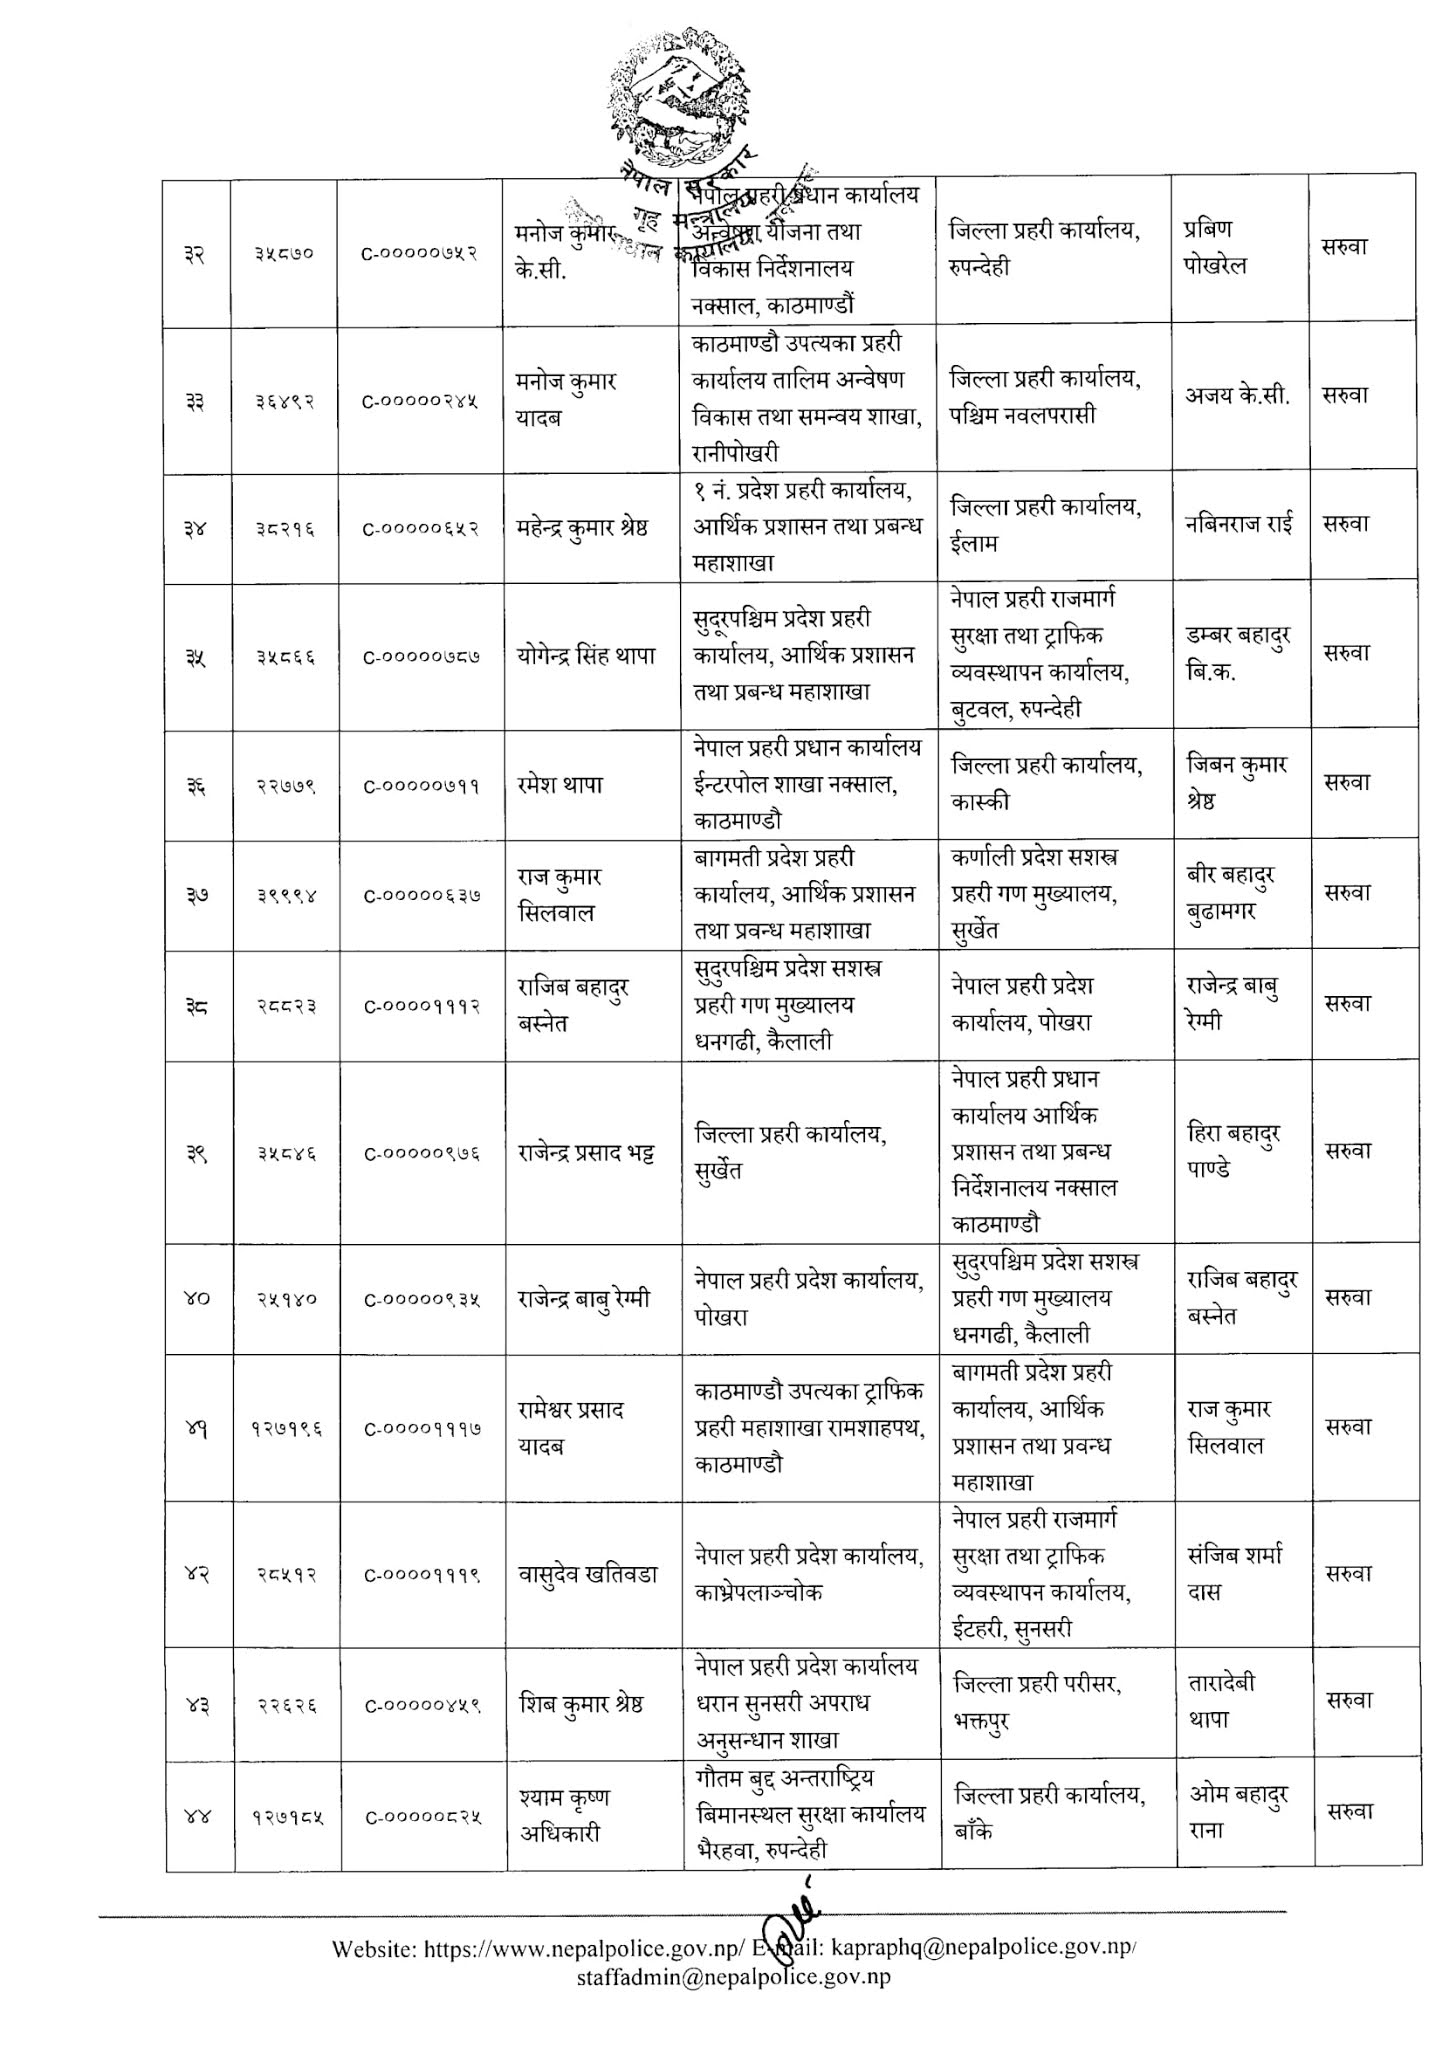 Nepal Police - Transfer List of 52 Superintendent of Nepal Police (SP)